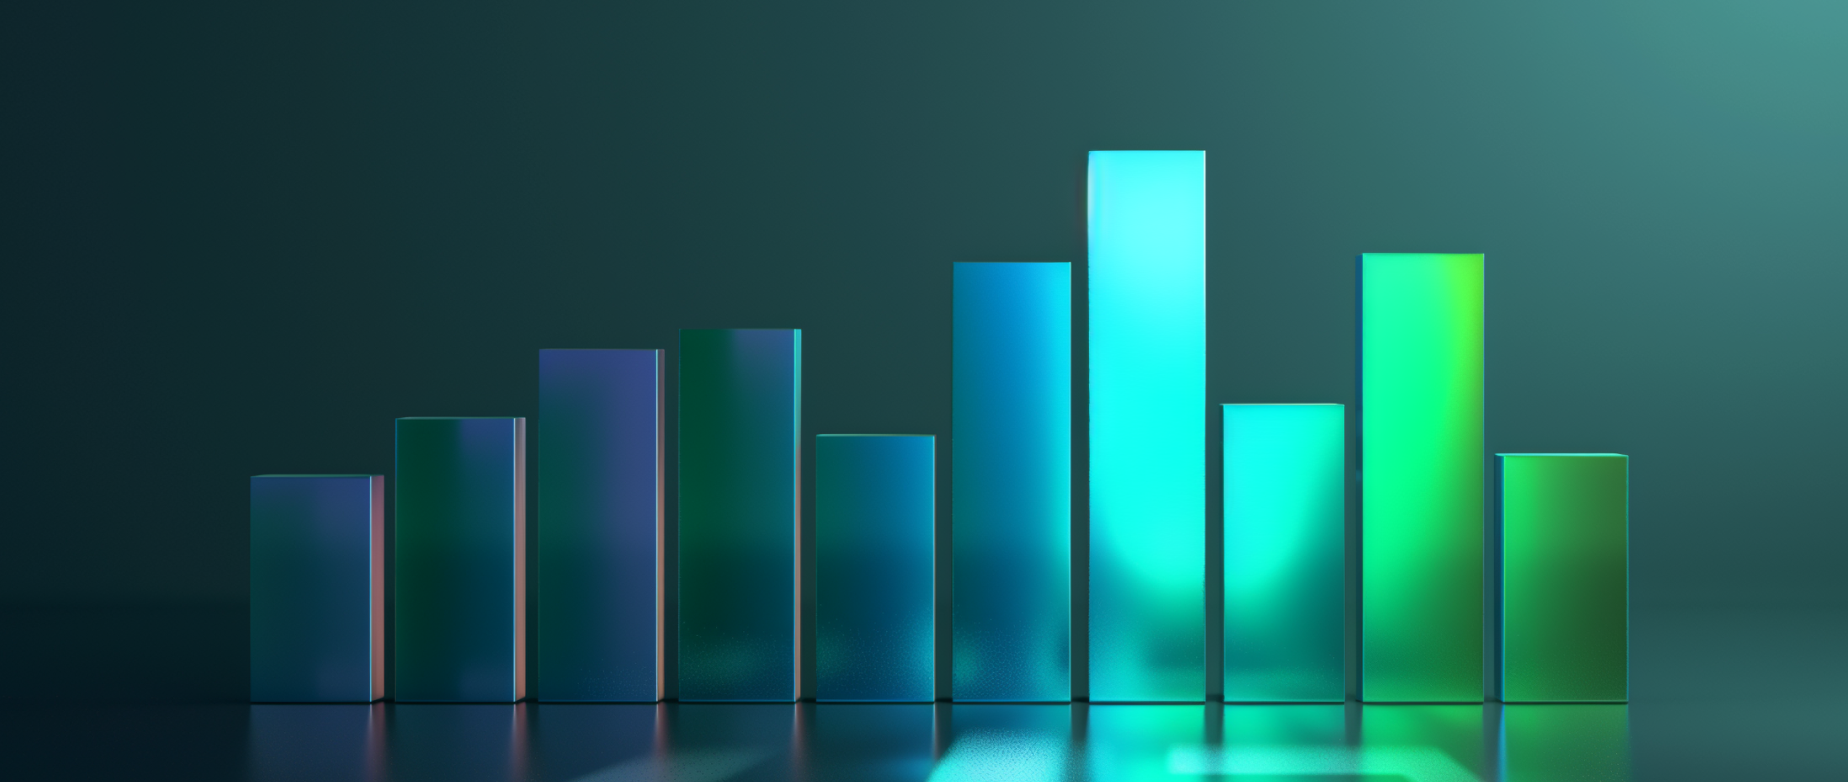 A shiny 3D bar graph with green and blue bars.